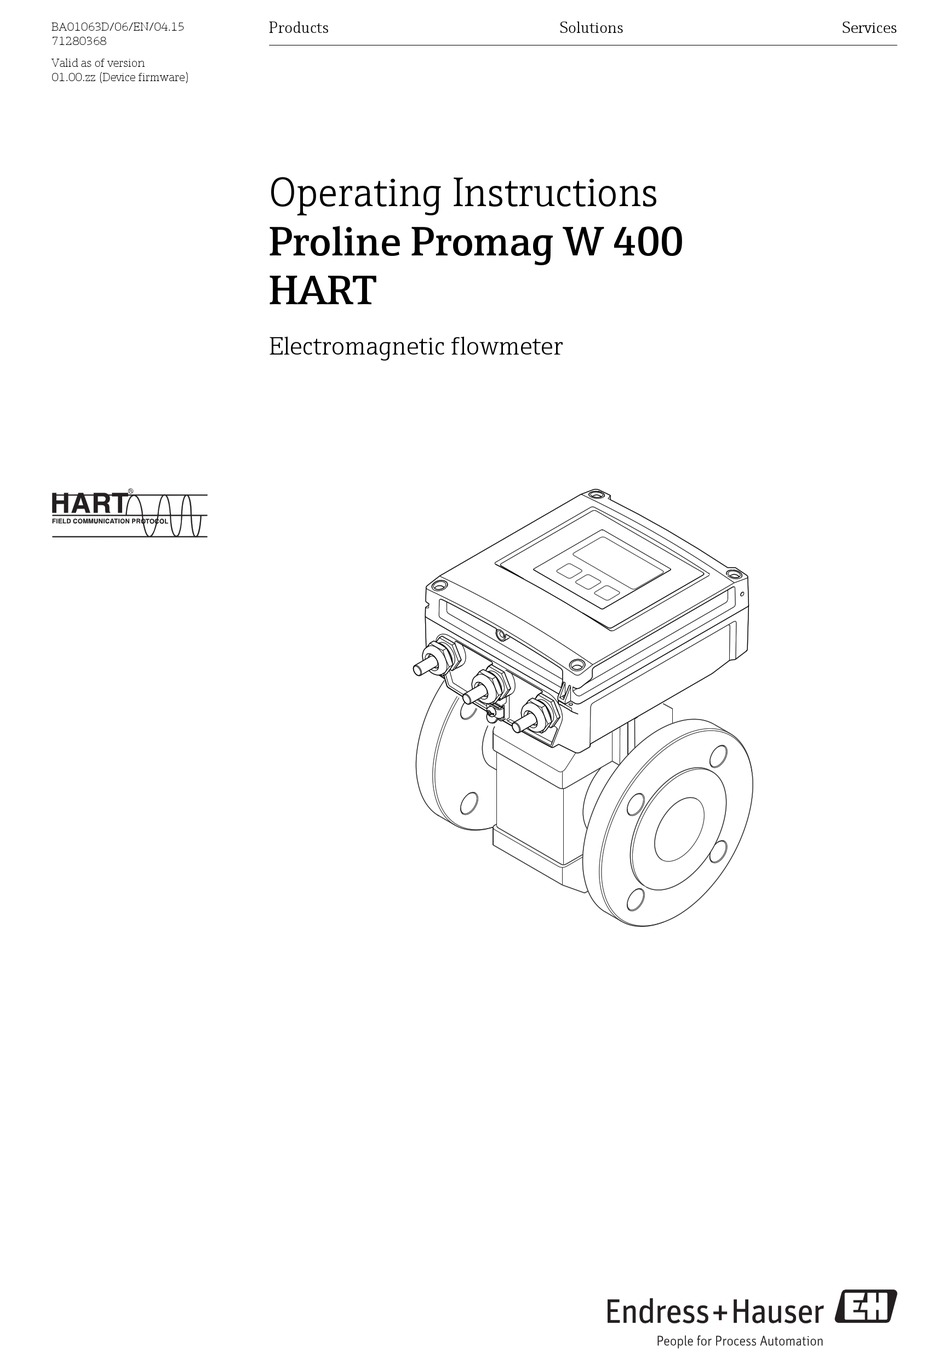 ENDRESS+HAUSER PROLINE PROMAG W 400 HART OPERATING INSTRUCTIONS MANUAL